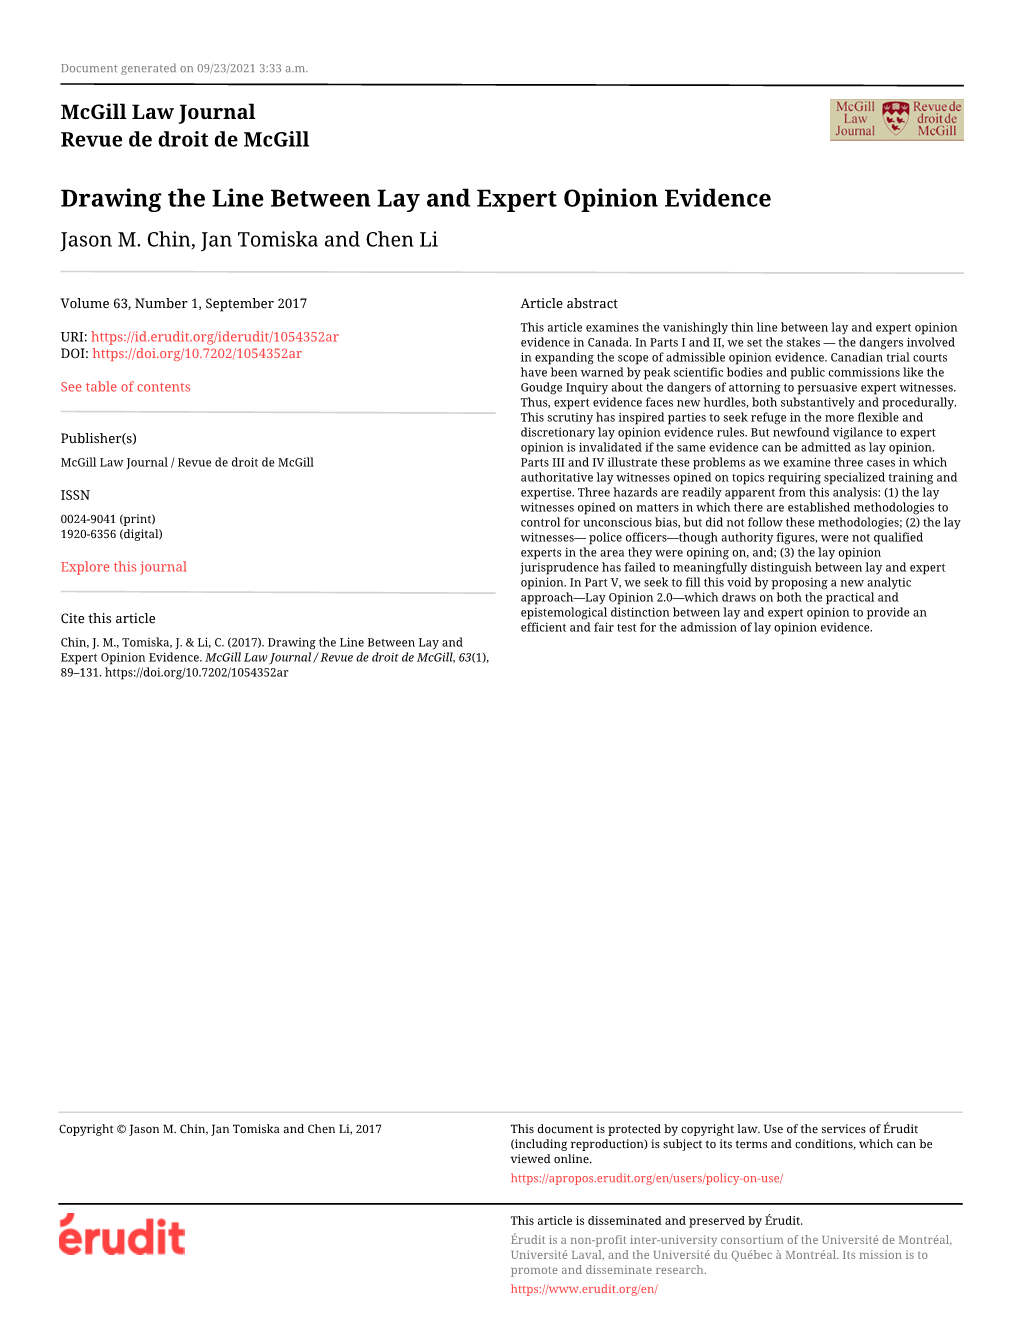 Drawing the Line Between Lay and Expert Opinion Evidence Jason M